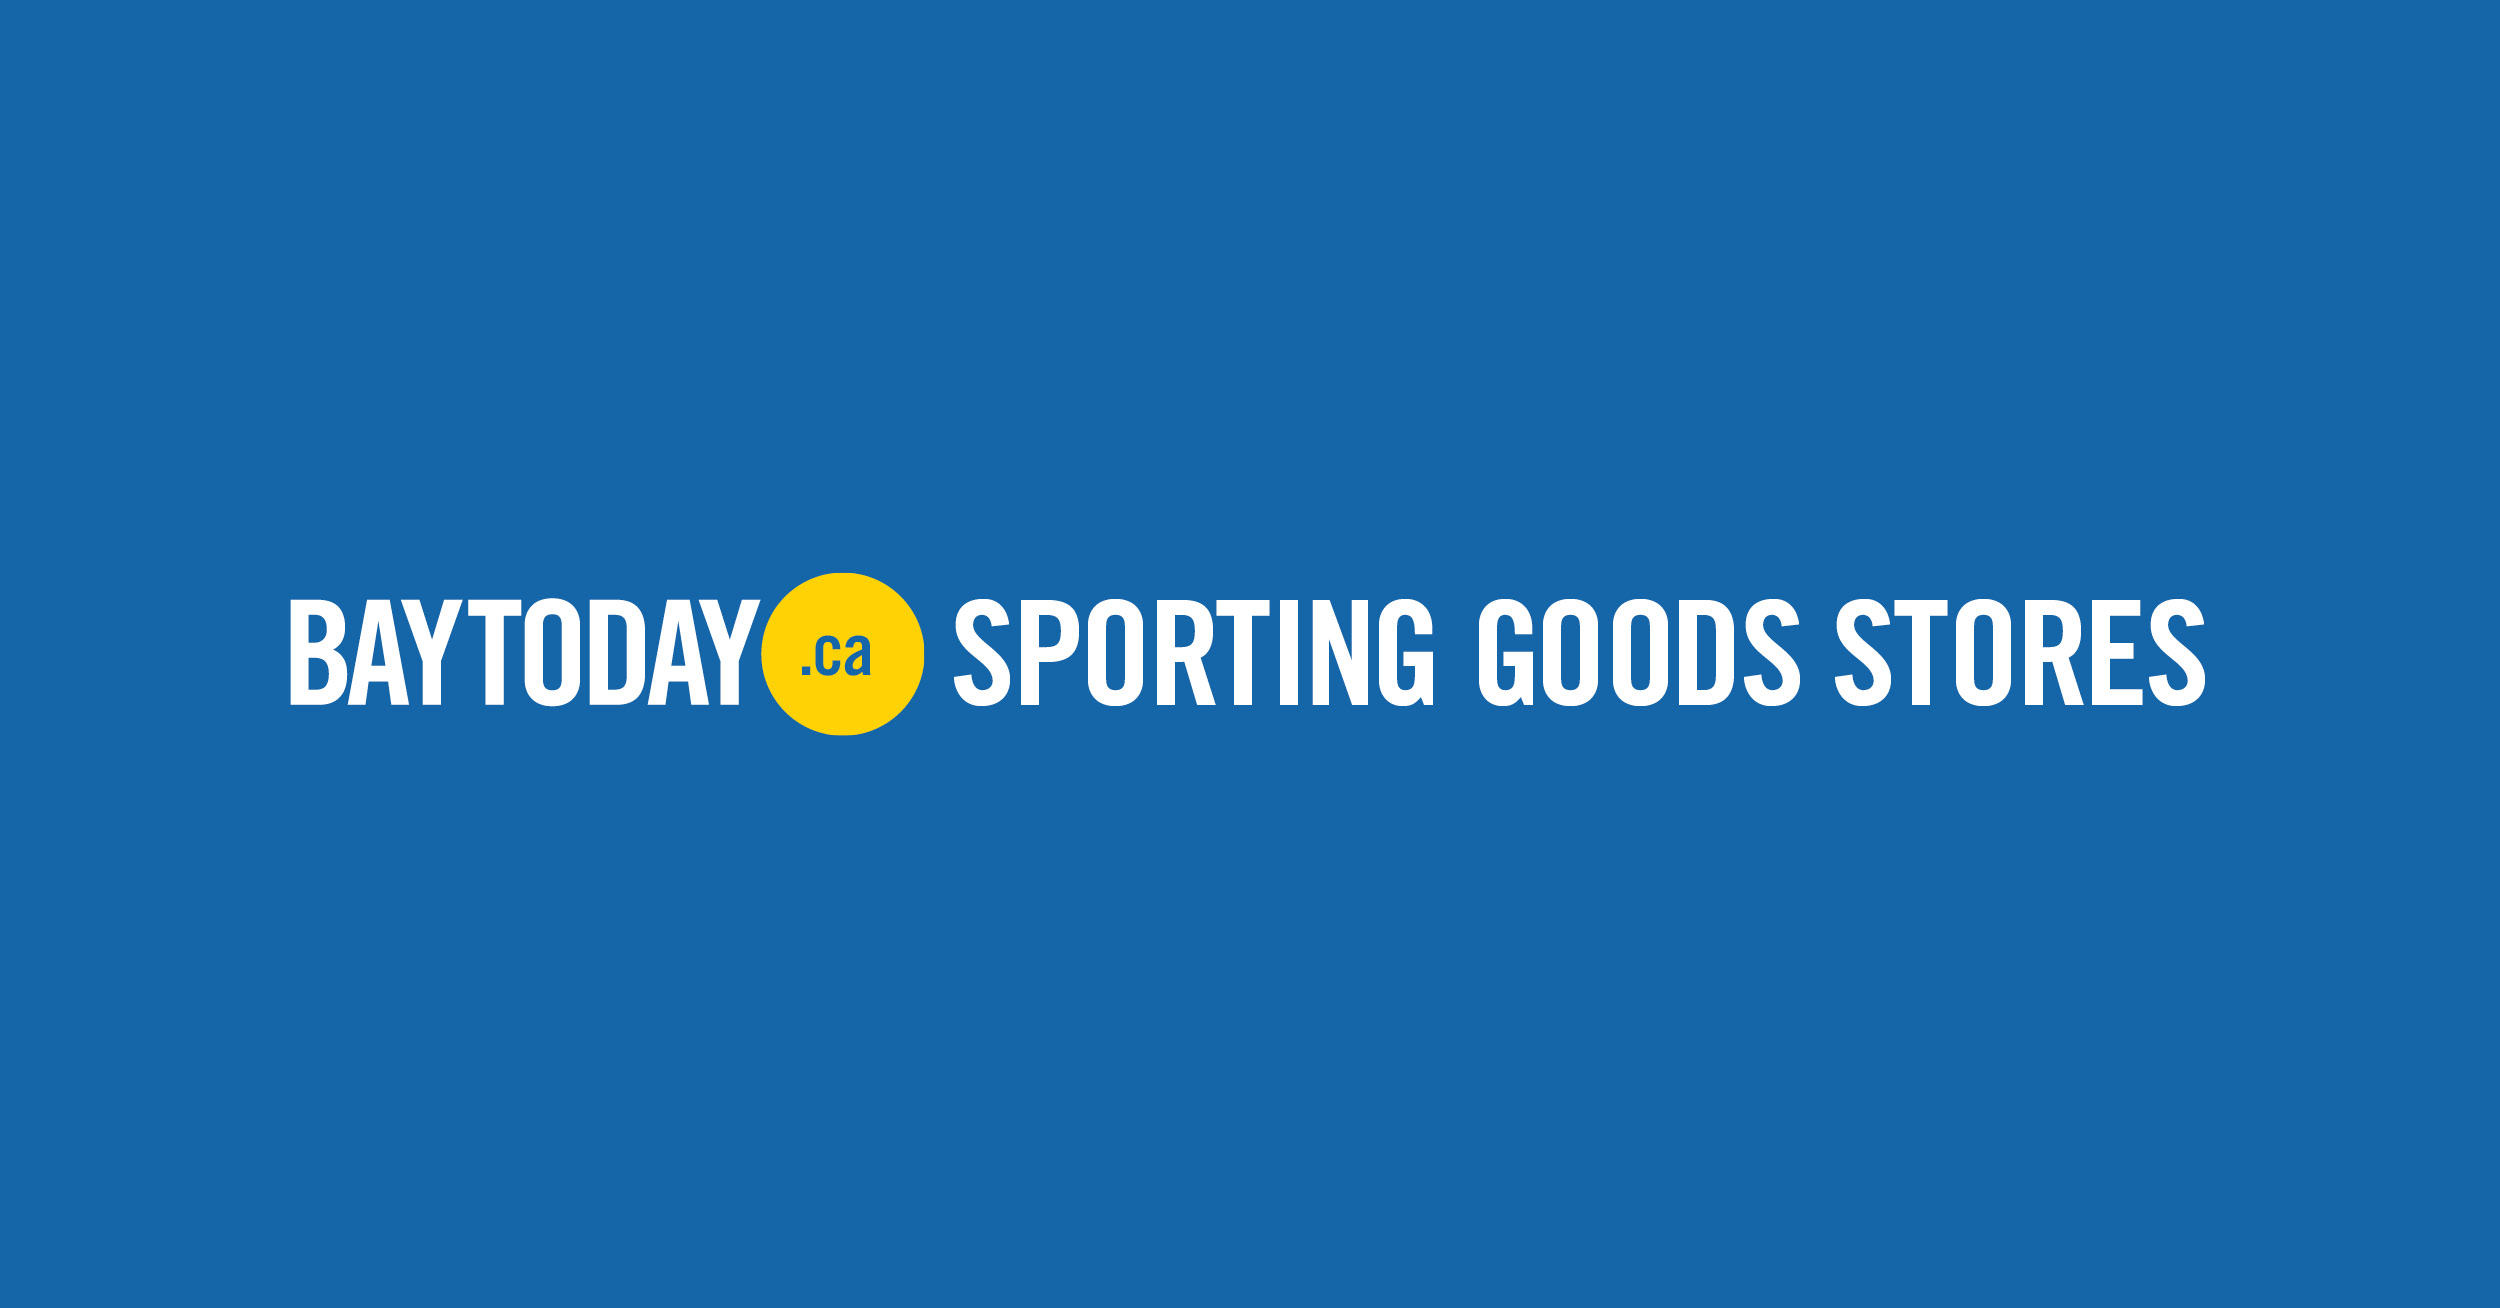 North Bay Sporting Goods Stores - North Bay News